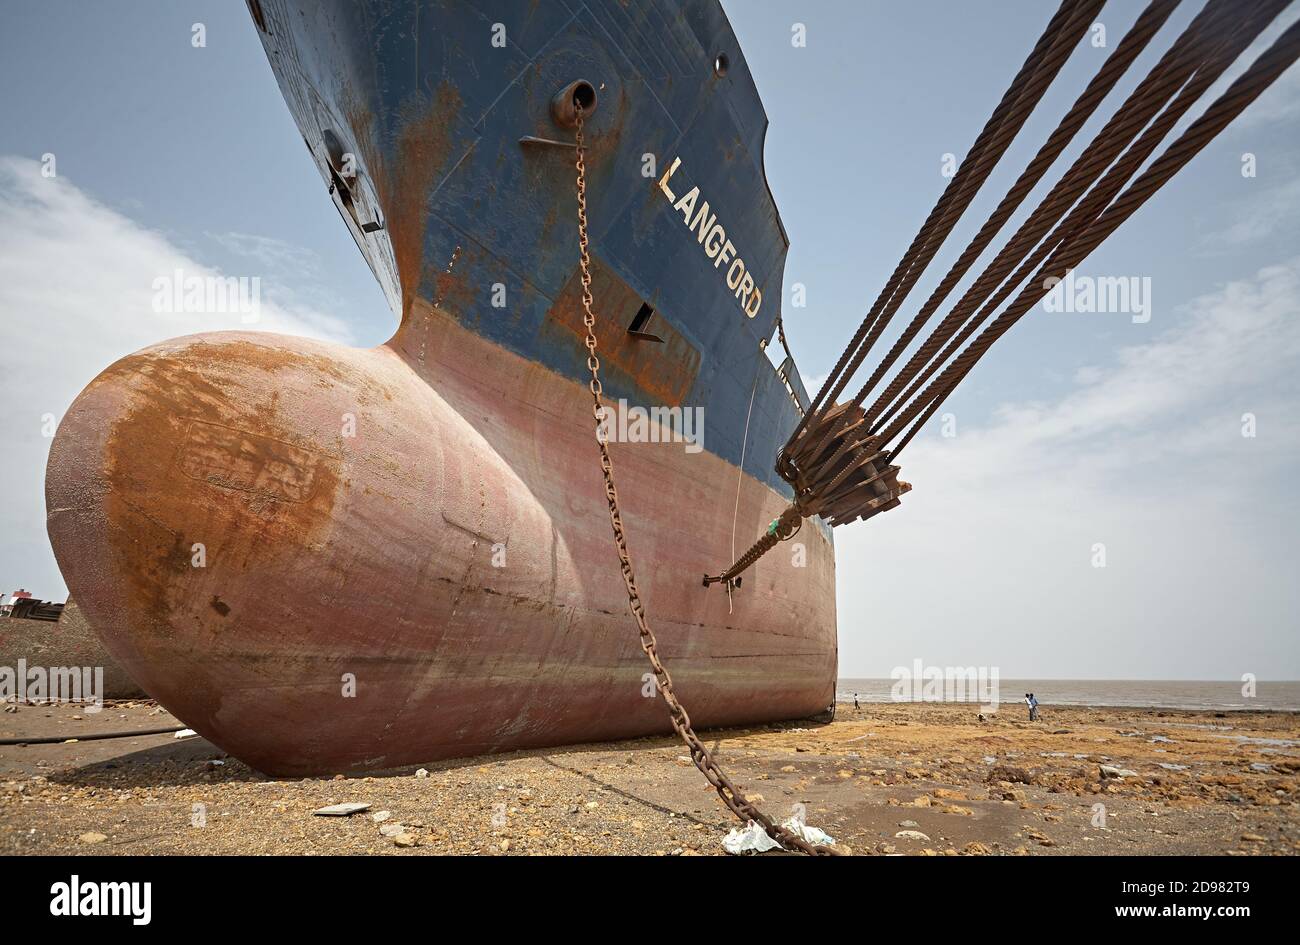 Alang, India, September 2008.Close up front view of a large tonnage cargo ship stranded on the beach waiting to be scrapped. Stock Photo